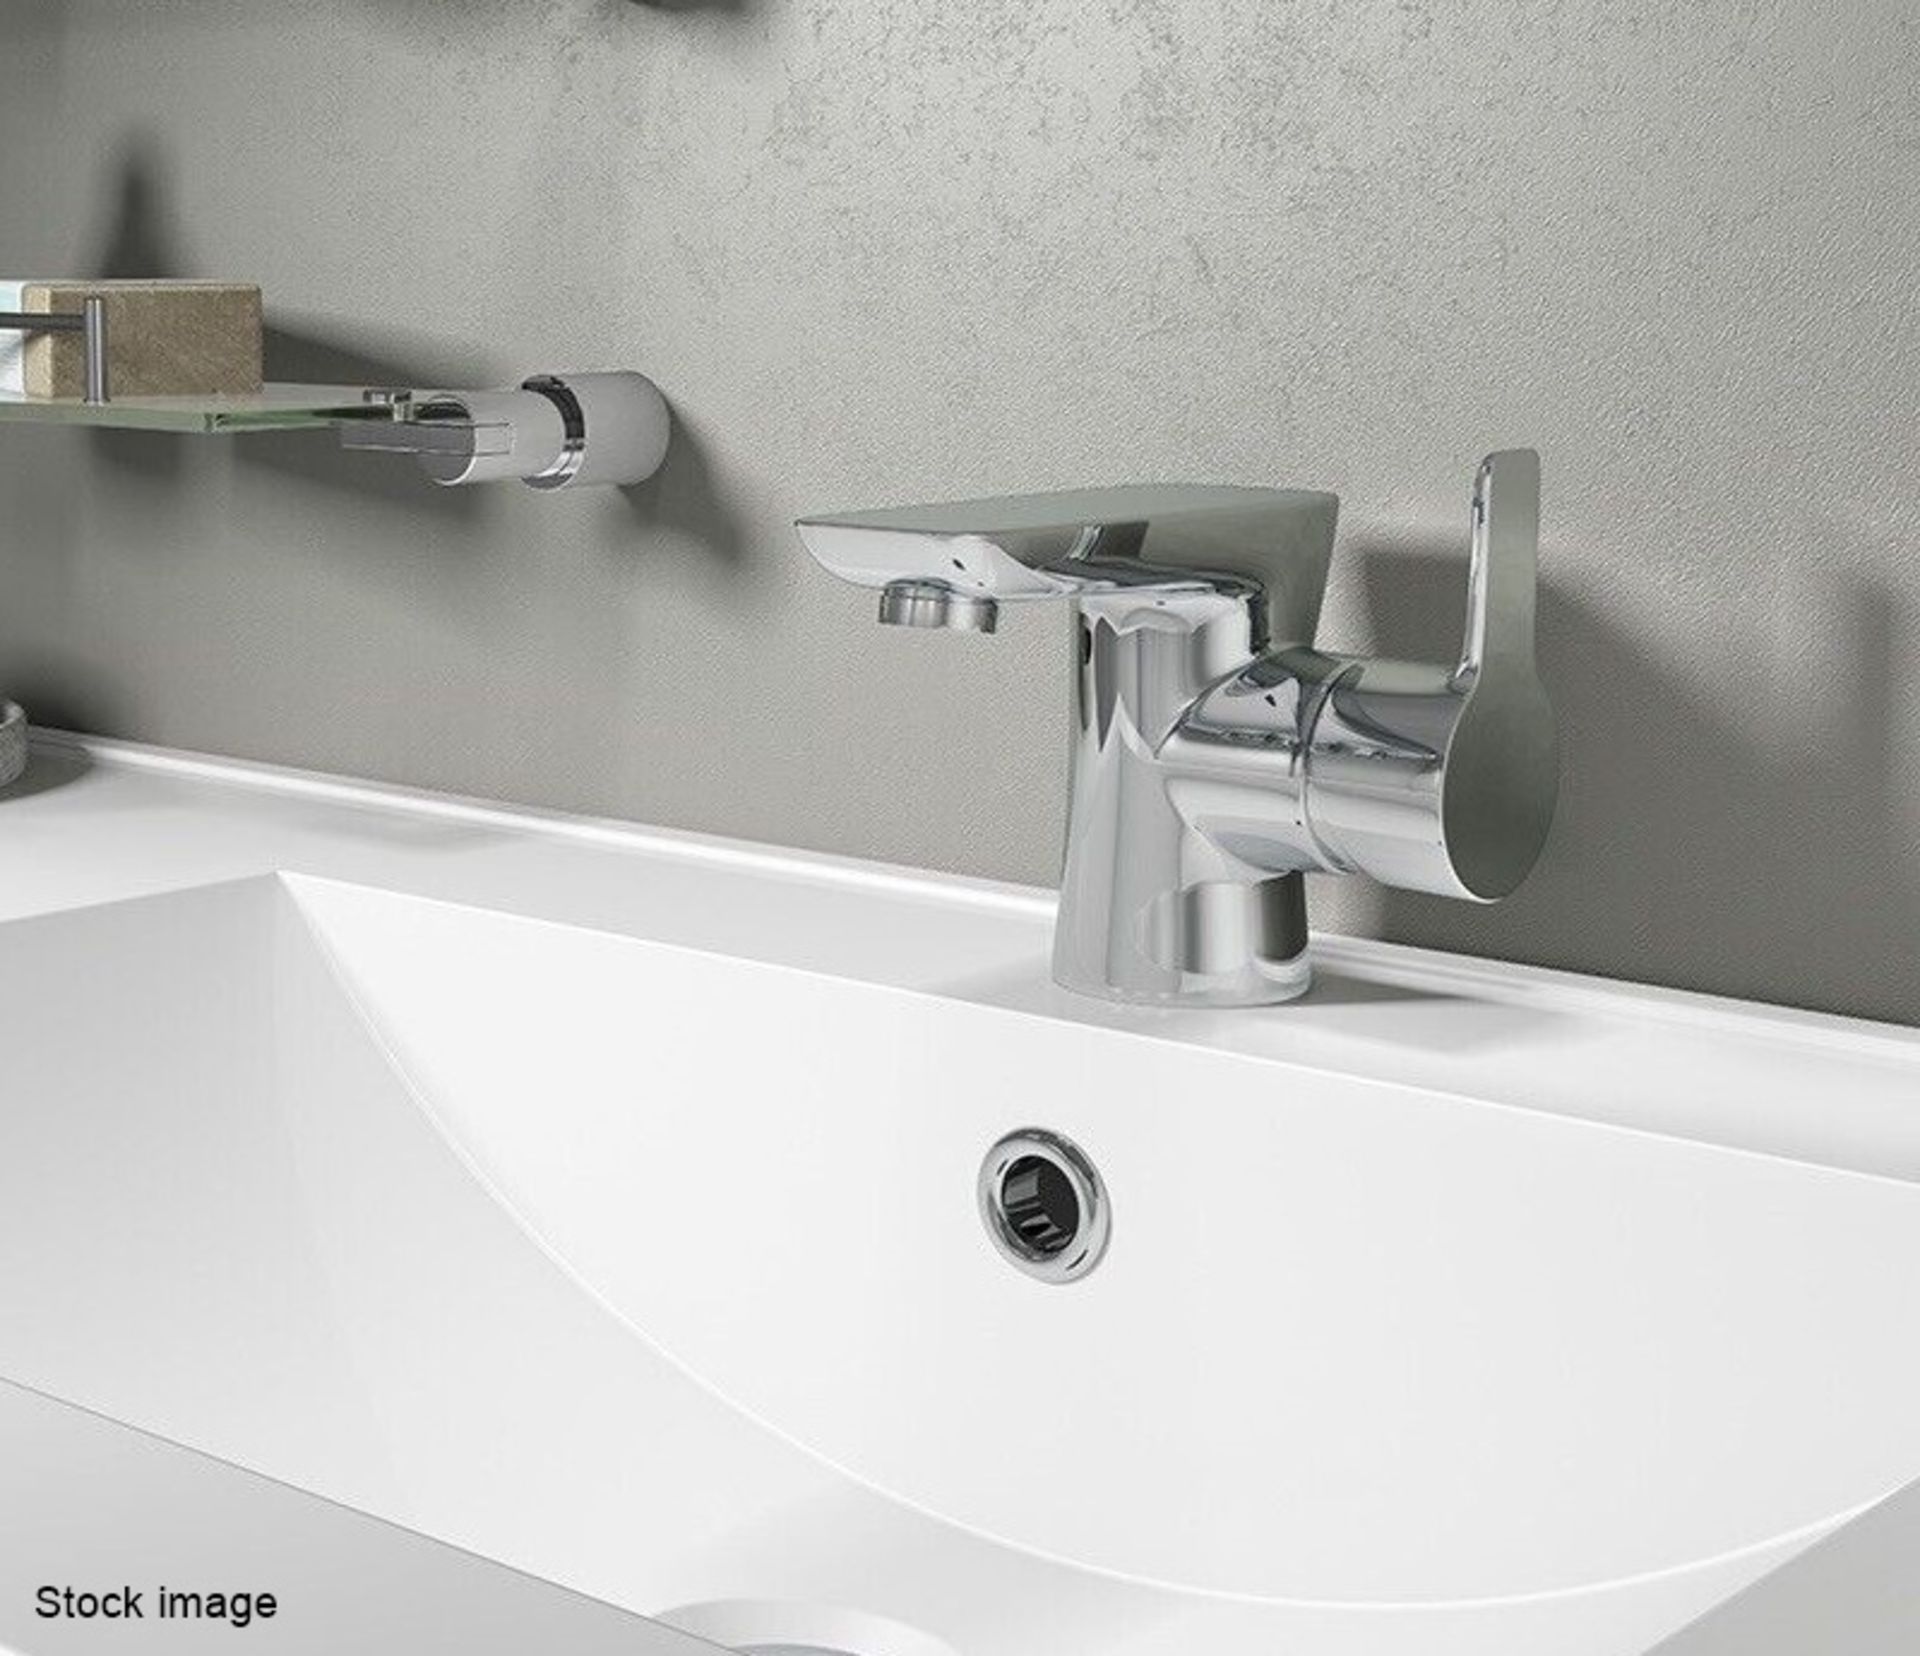 1 x CASSELLIE 'Pedras' Mono Basin Mixer With Push Waste In Chrome - Ref: PED001 - RRP £153.99 -